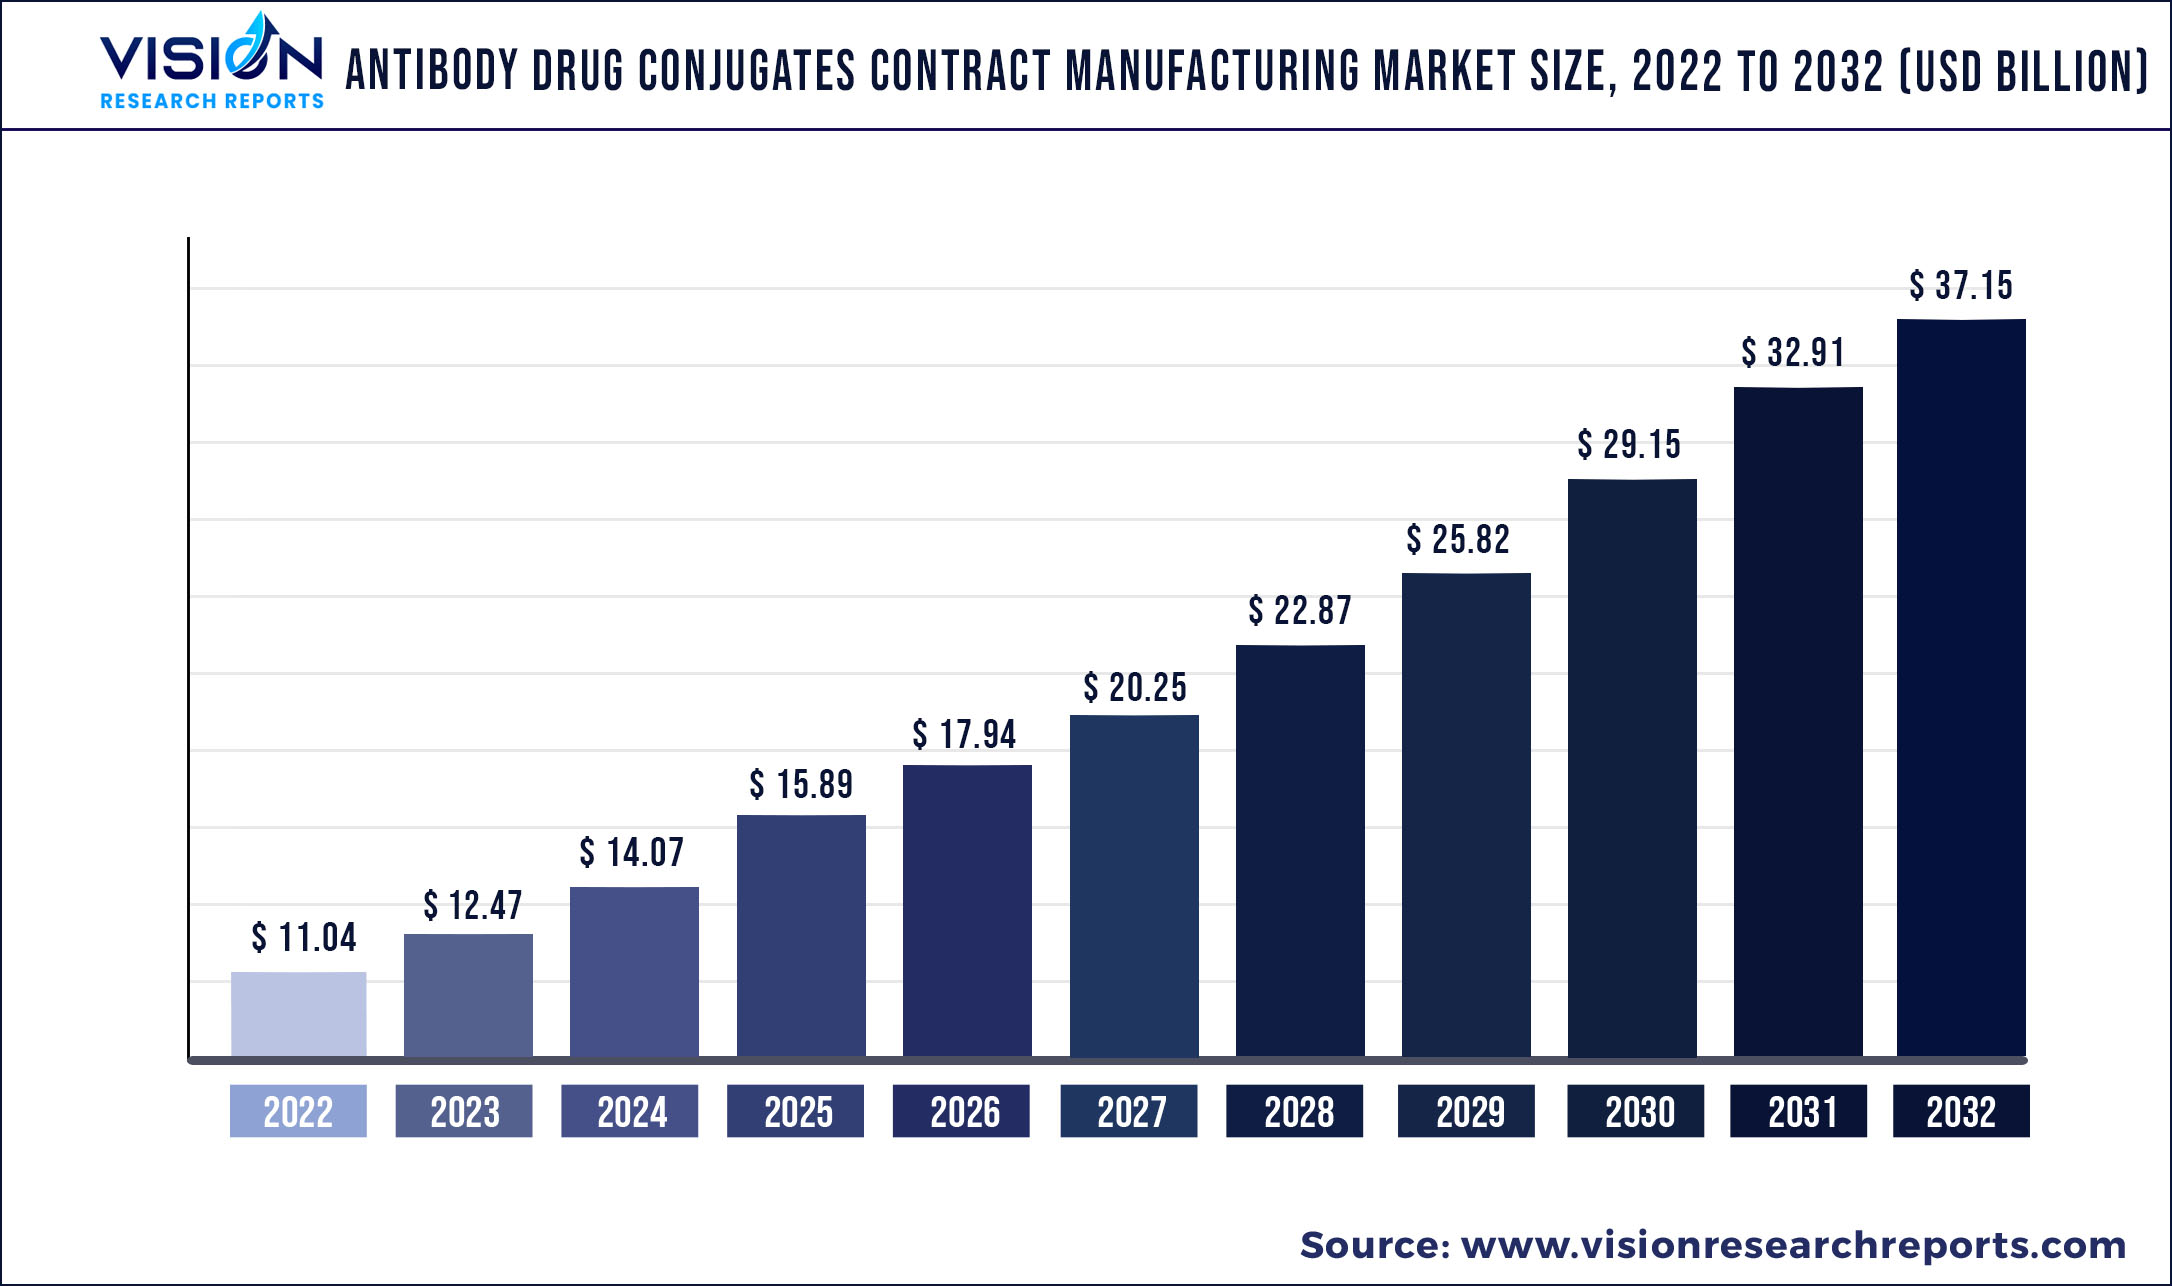 Antibody Drug Conjugates Contract Manufacturing Market Size 2022 to 2032